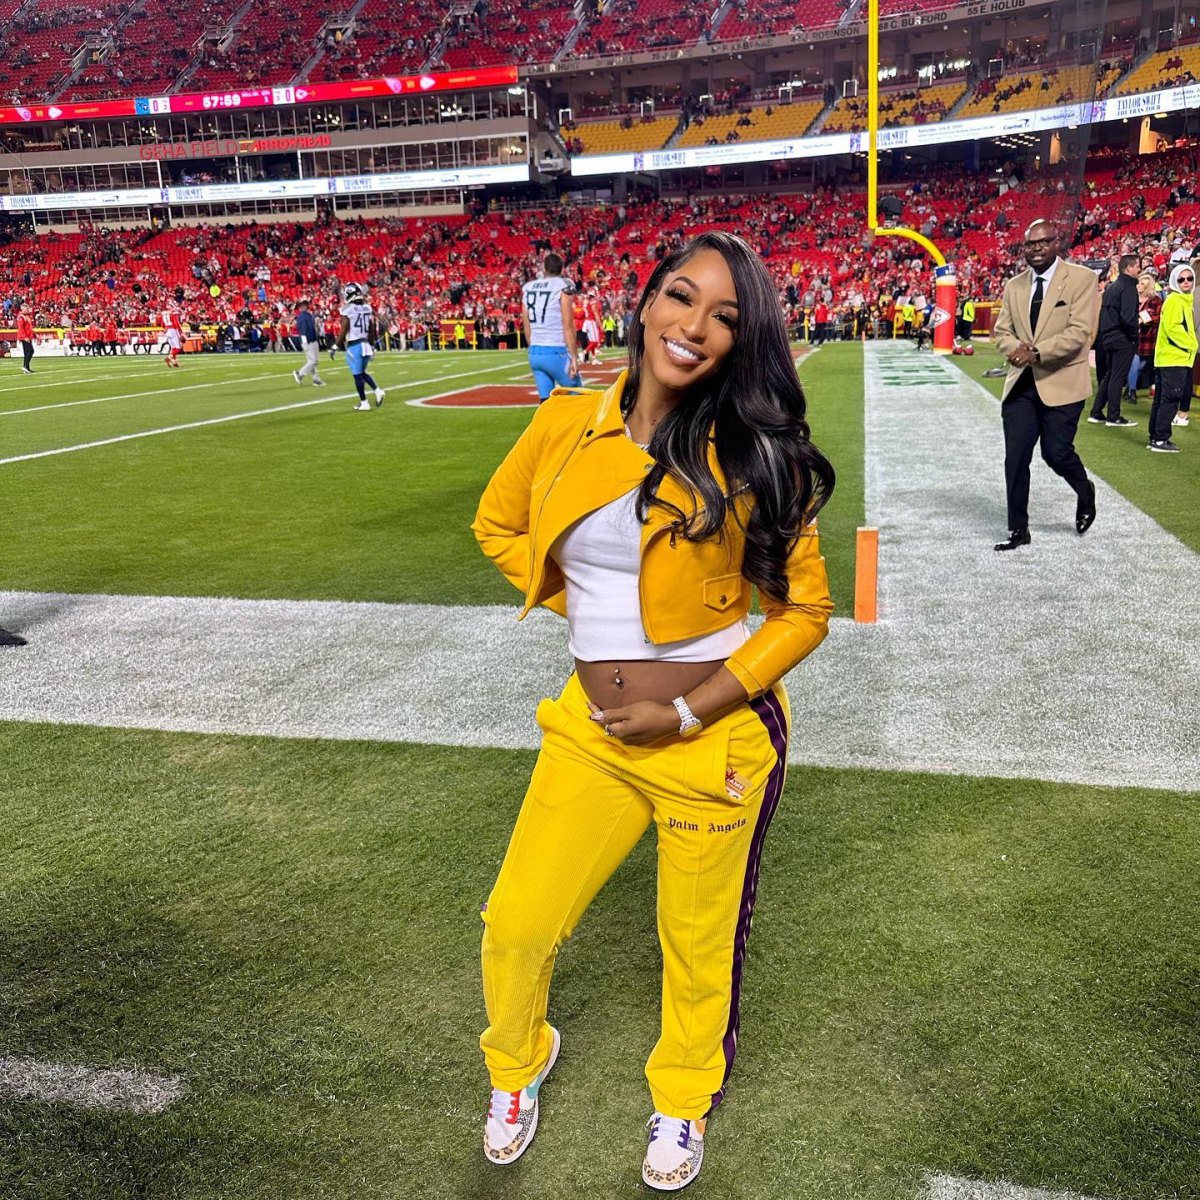 Chiefs WAGs celebrate New Year's together ahead of playoffs